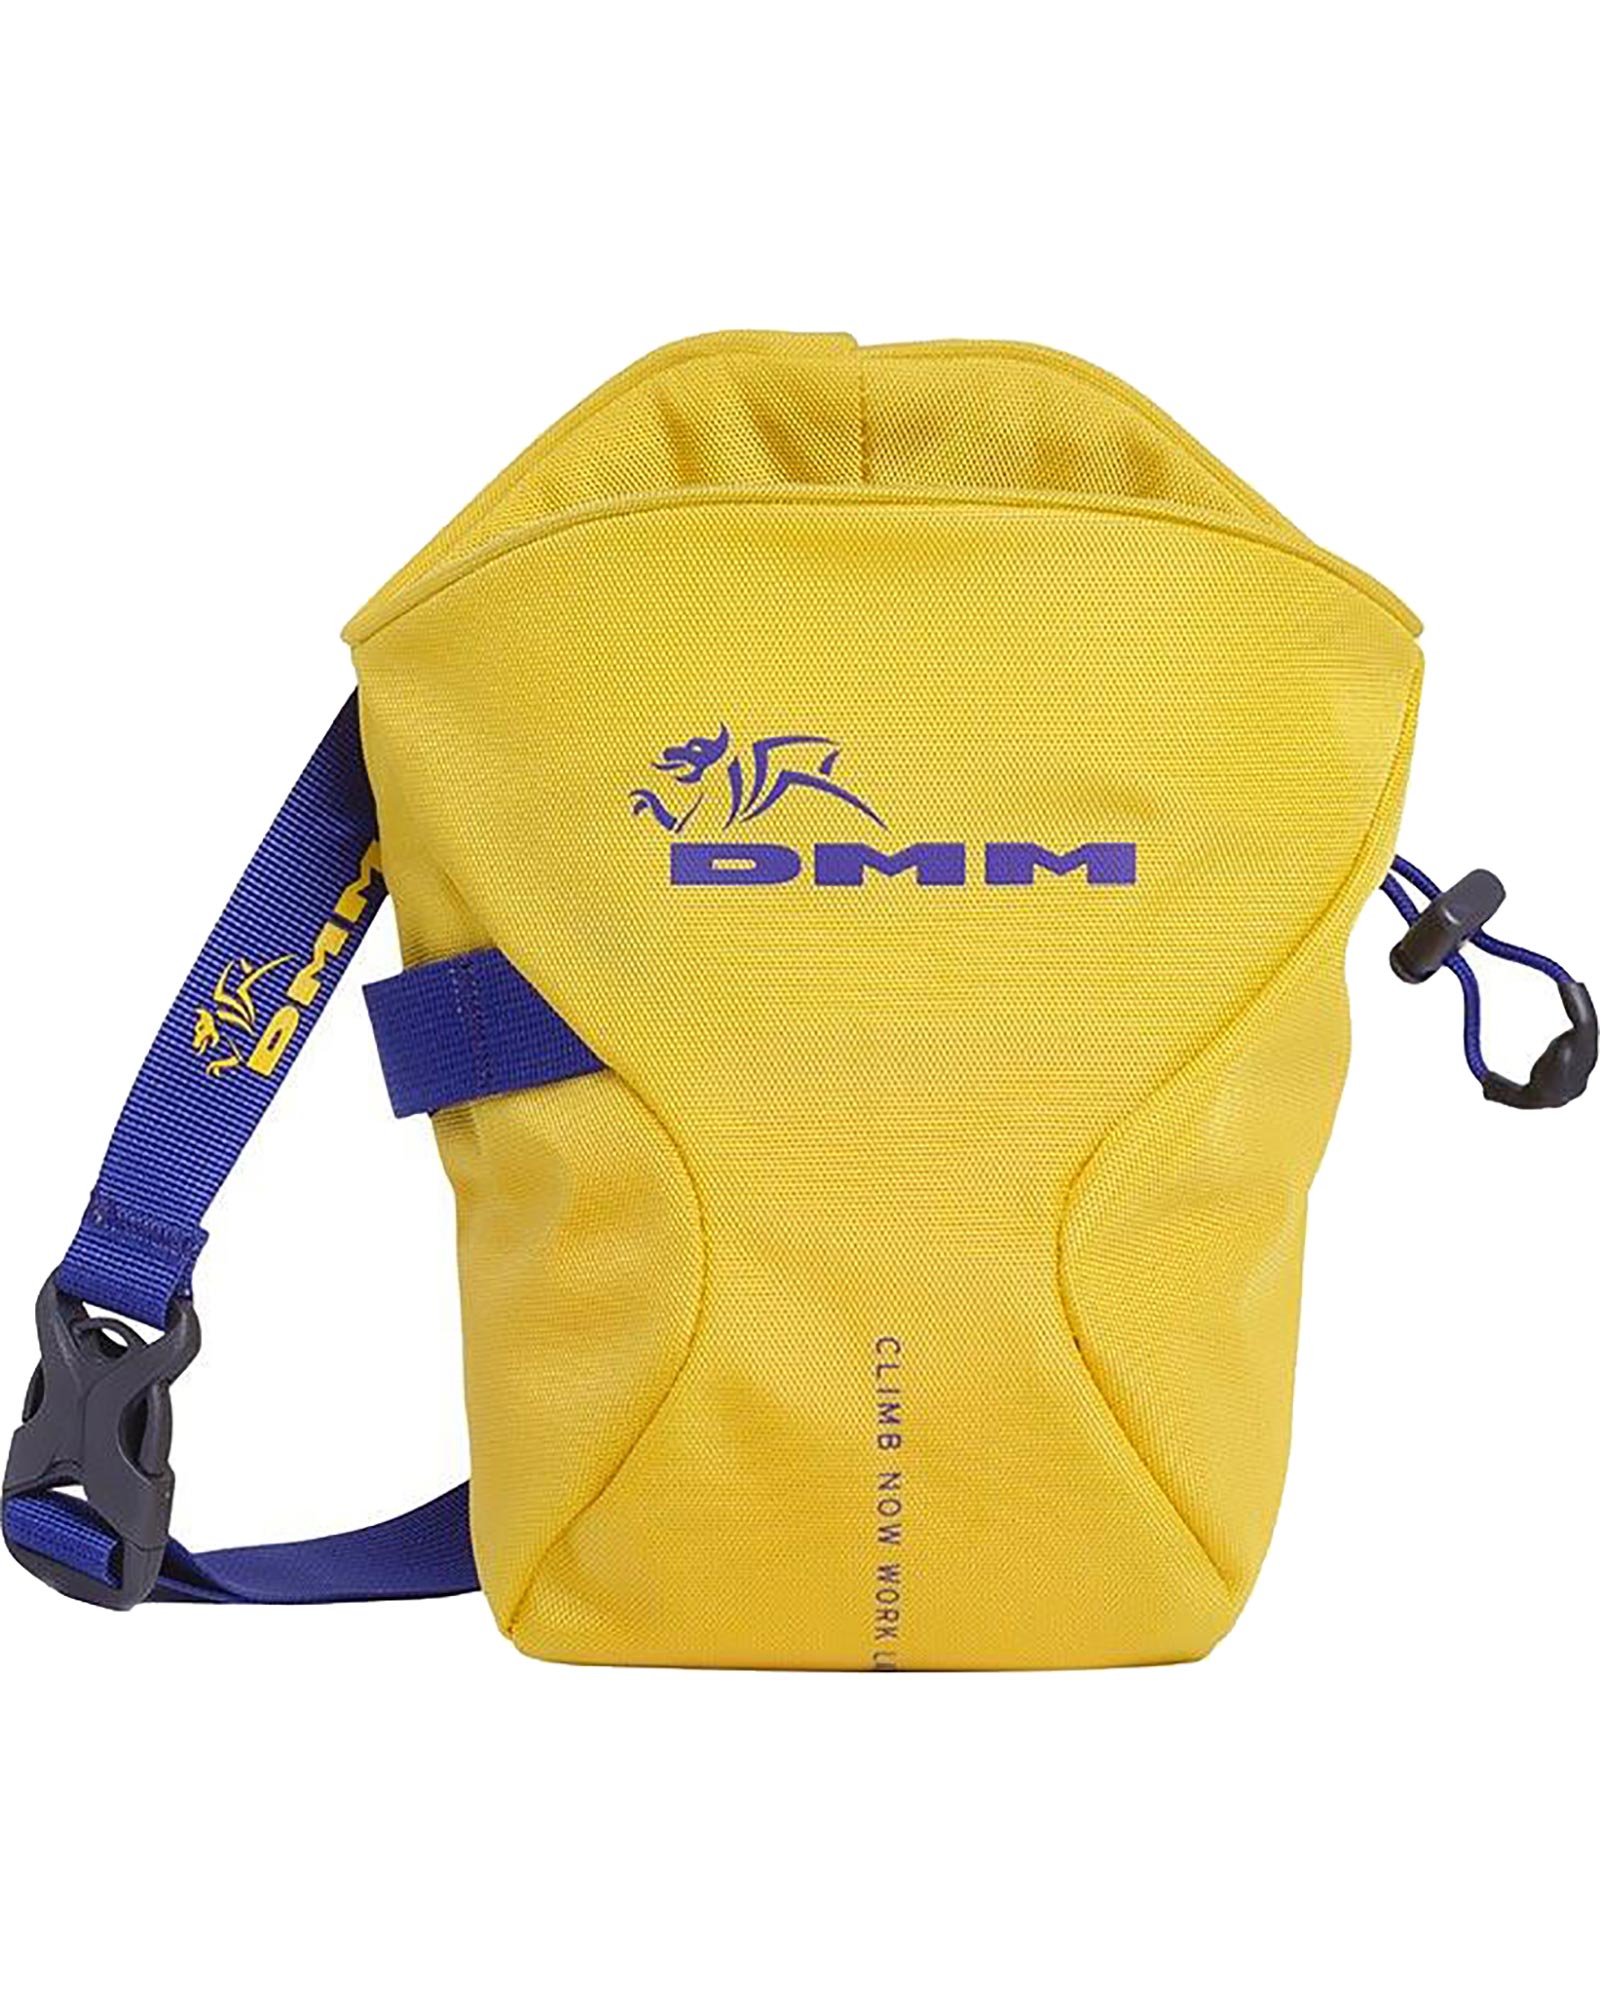 DMM Traction Chalk Bag | yellow